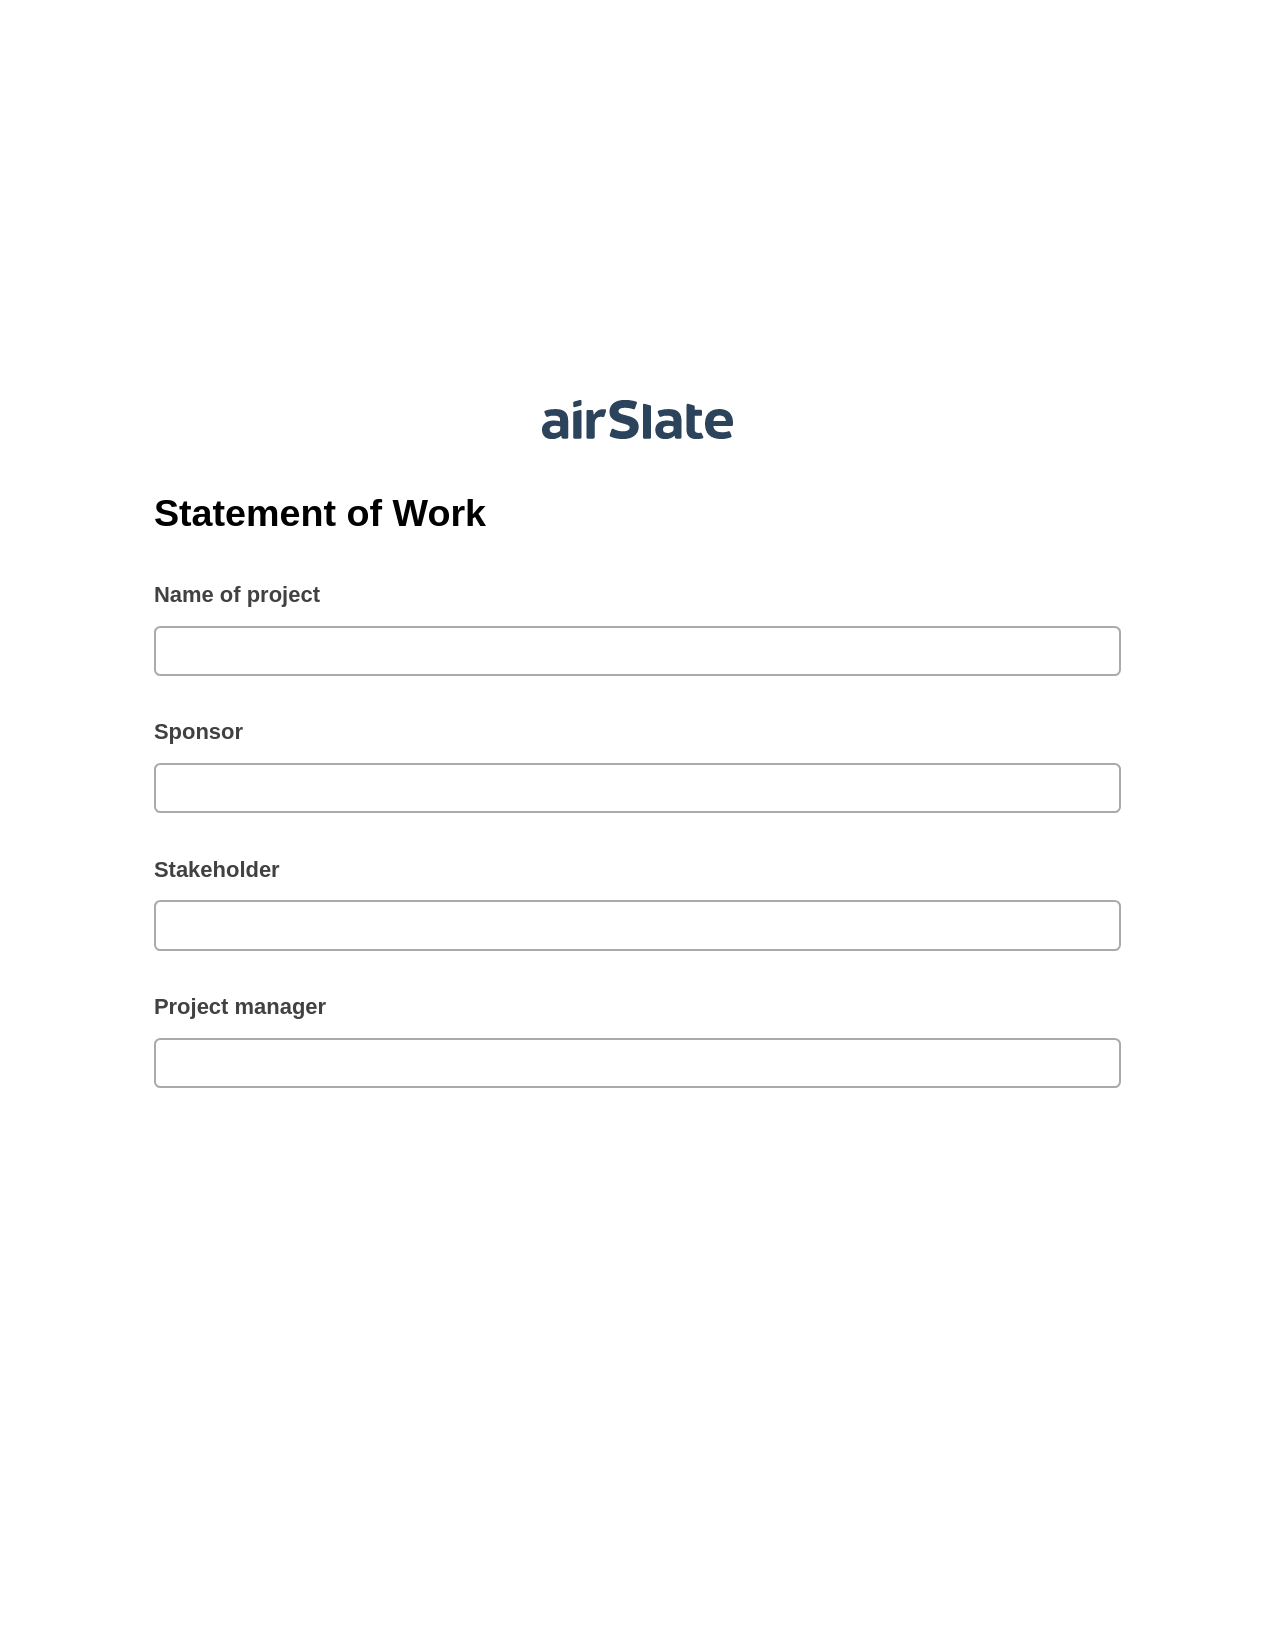 Statement of Work Pre-fill from Excel Spreadsheet Bot, Create slate bot, OneDrive Bot